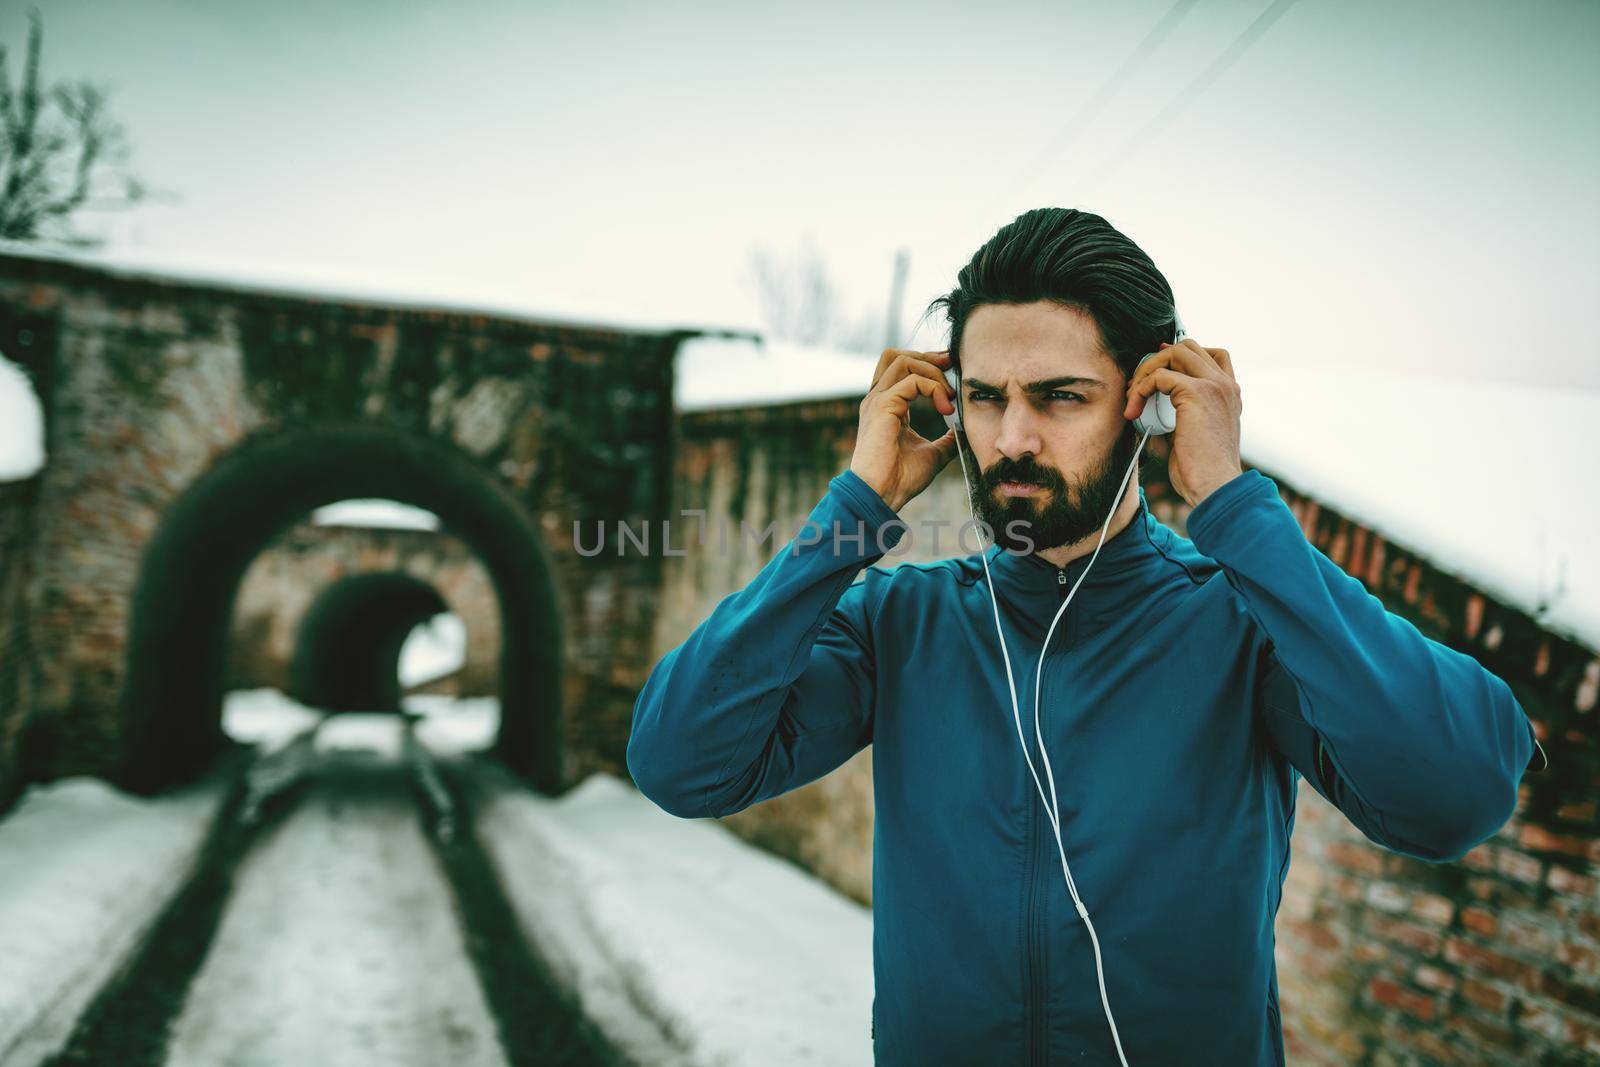 A male runner with headphones on his ears prepare to run in the public place during the winter training outside in. Copy space.